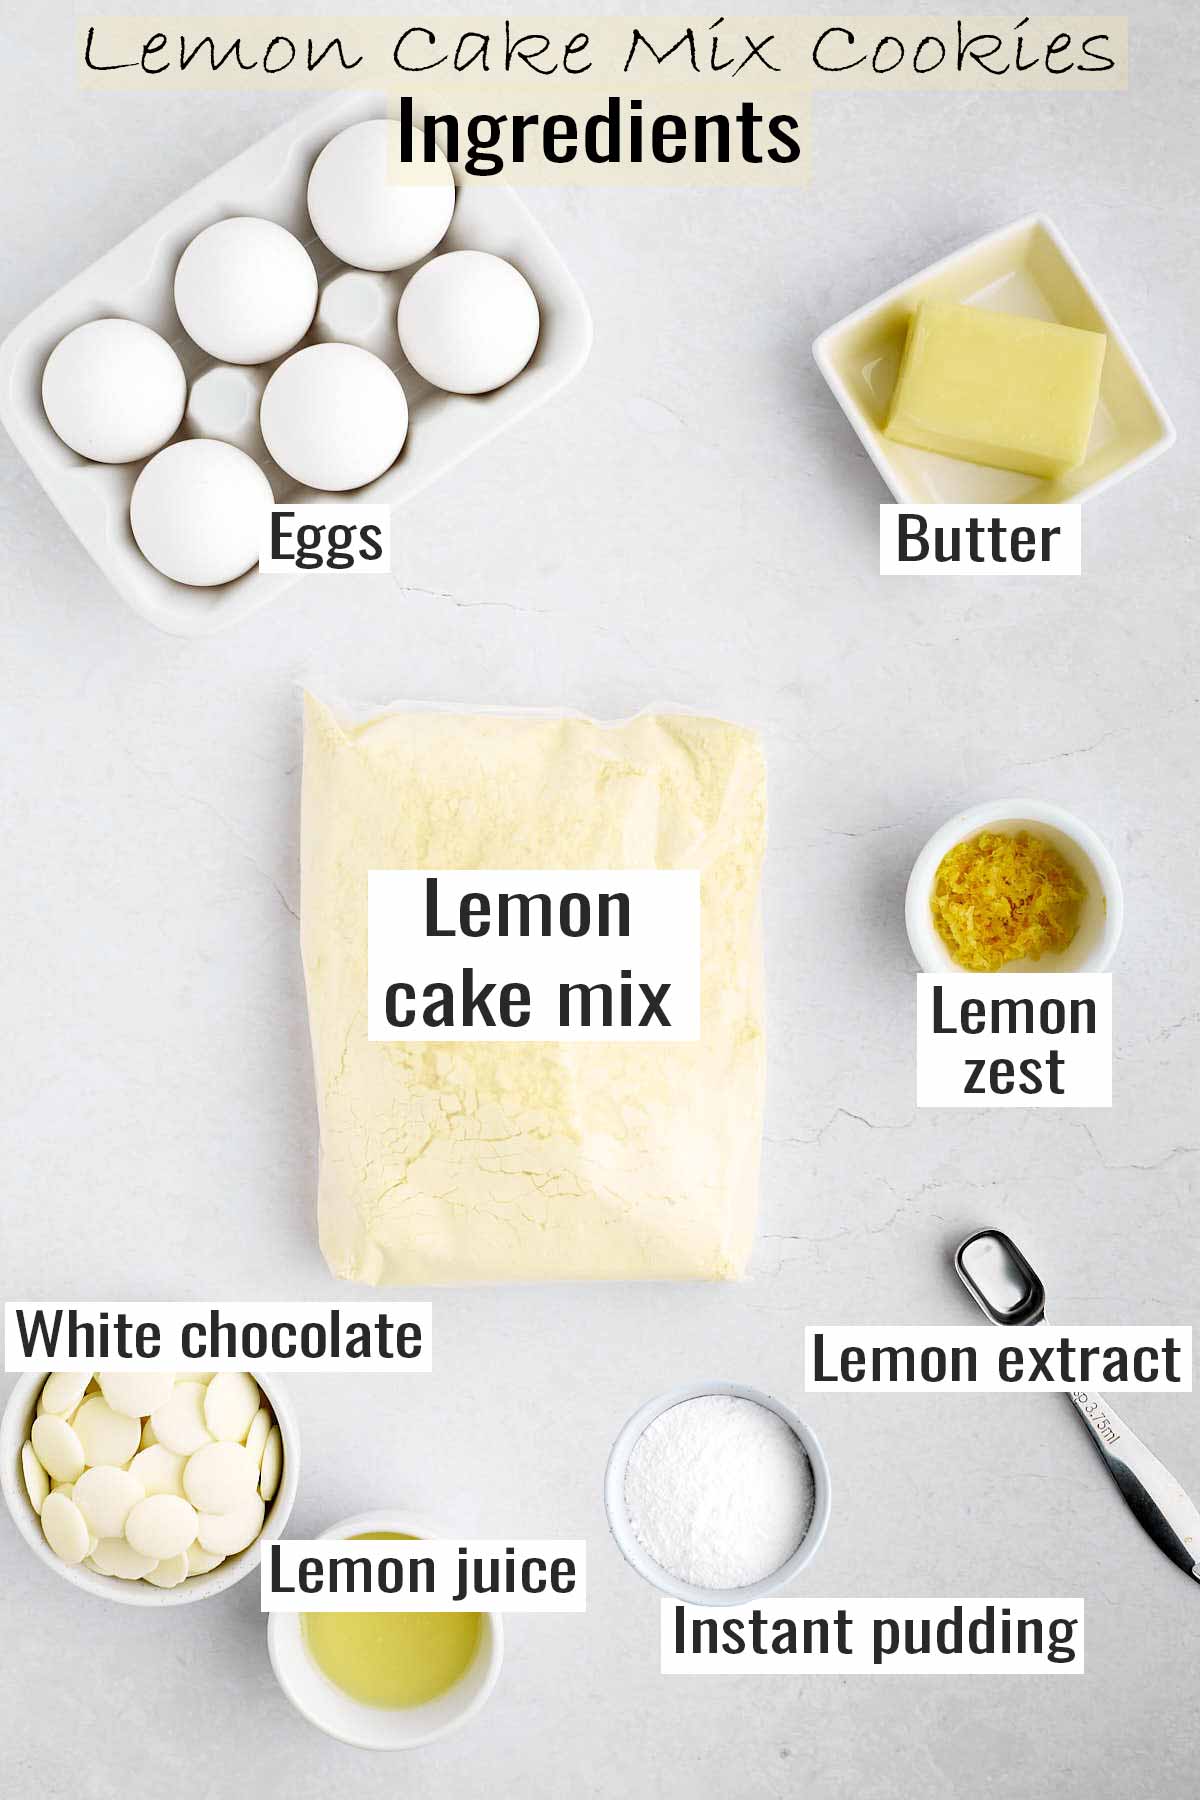 Labeled ingredients for lemon cake mix cookies.